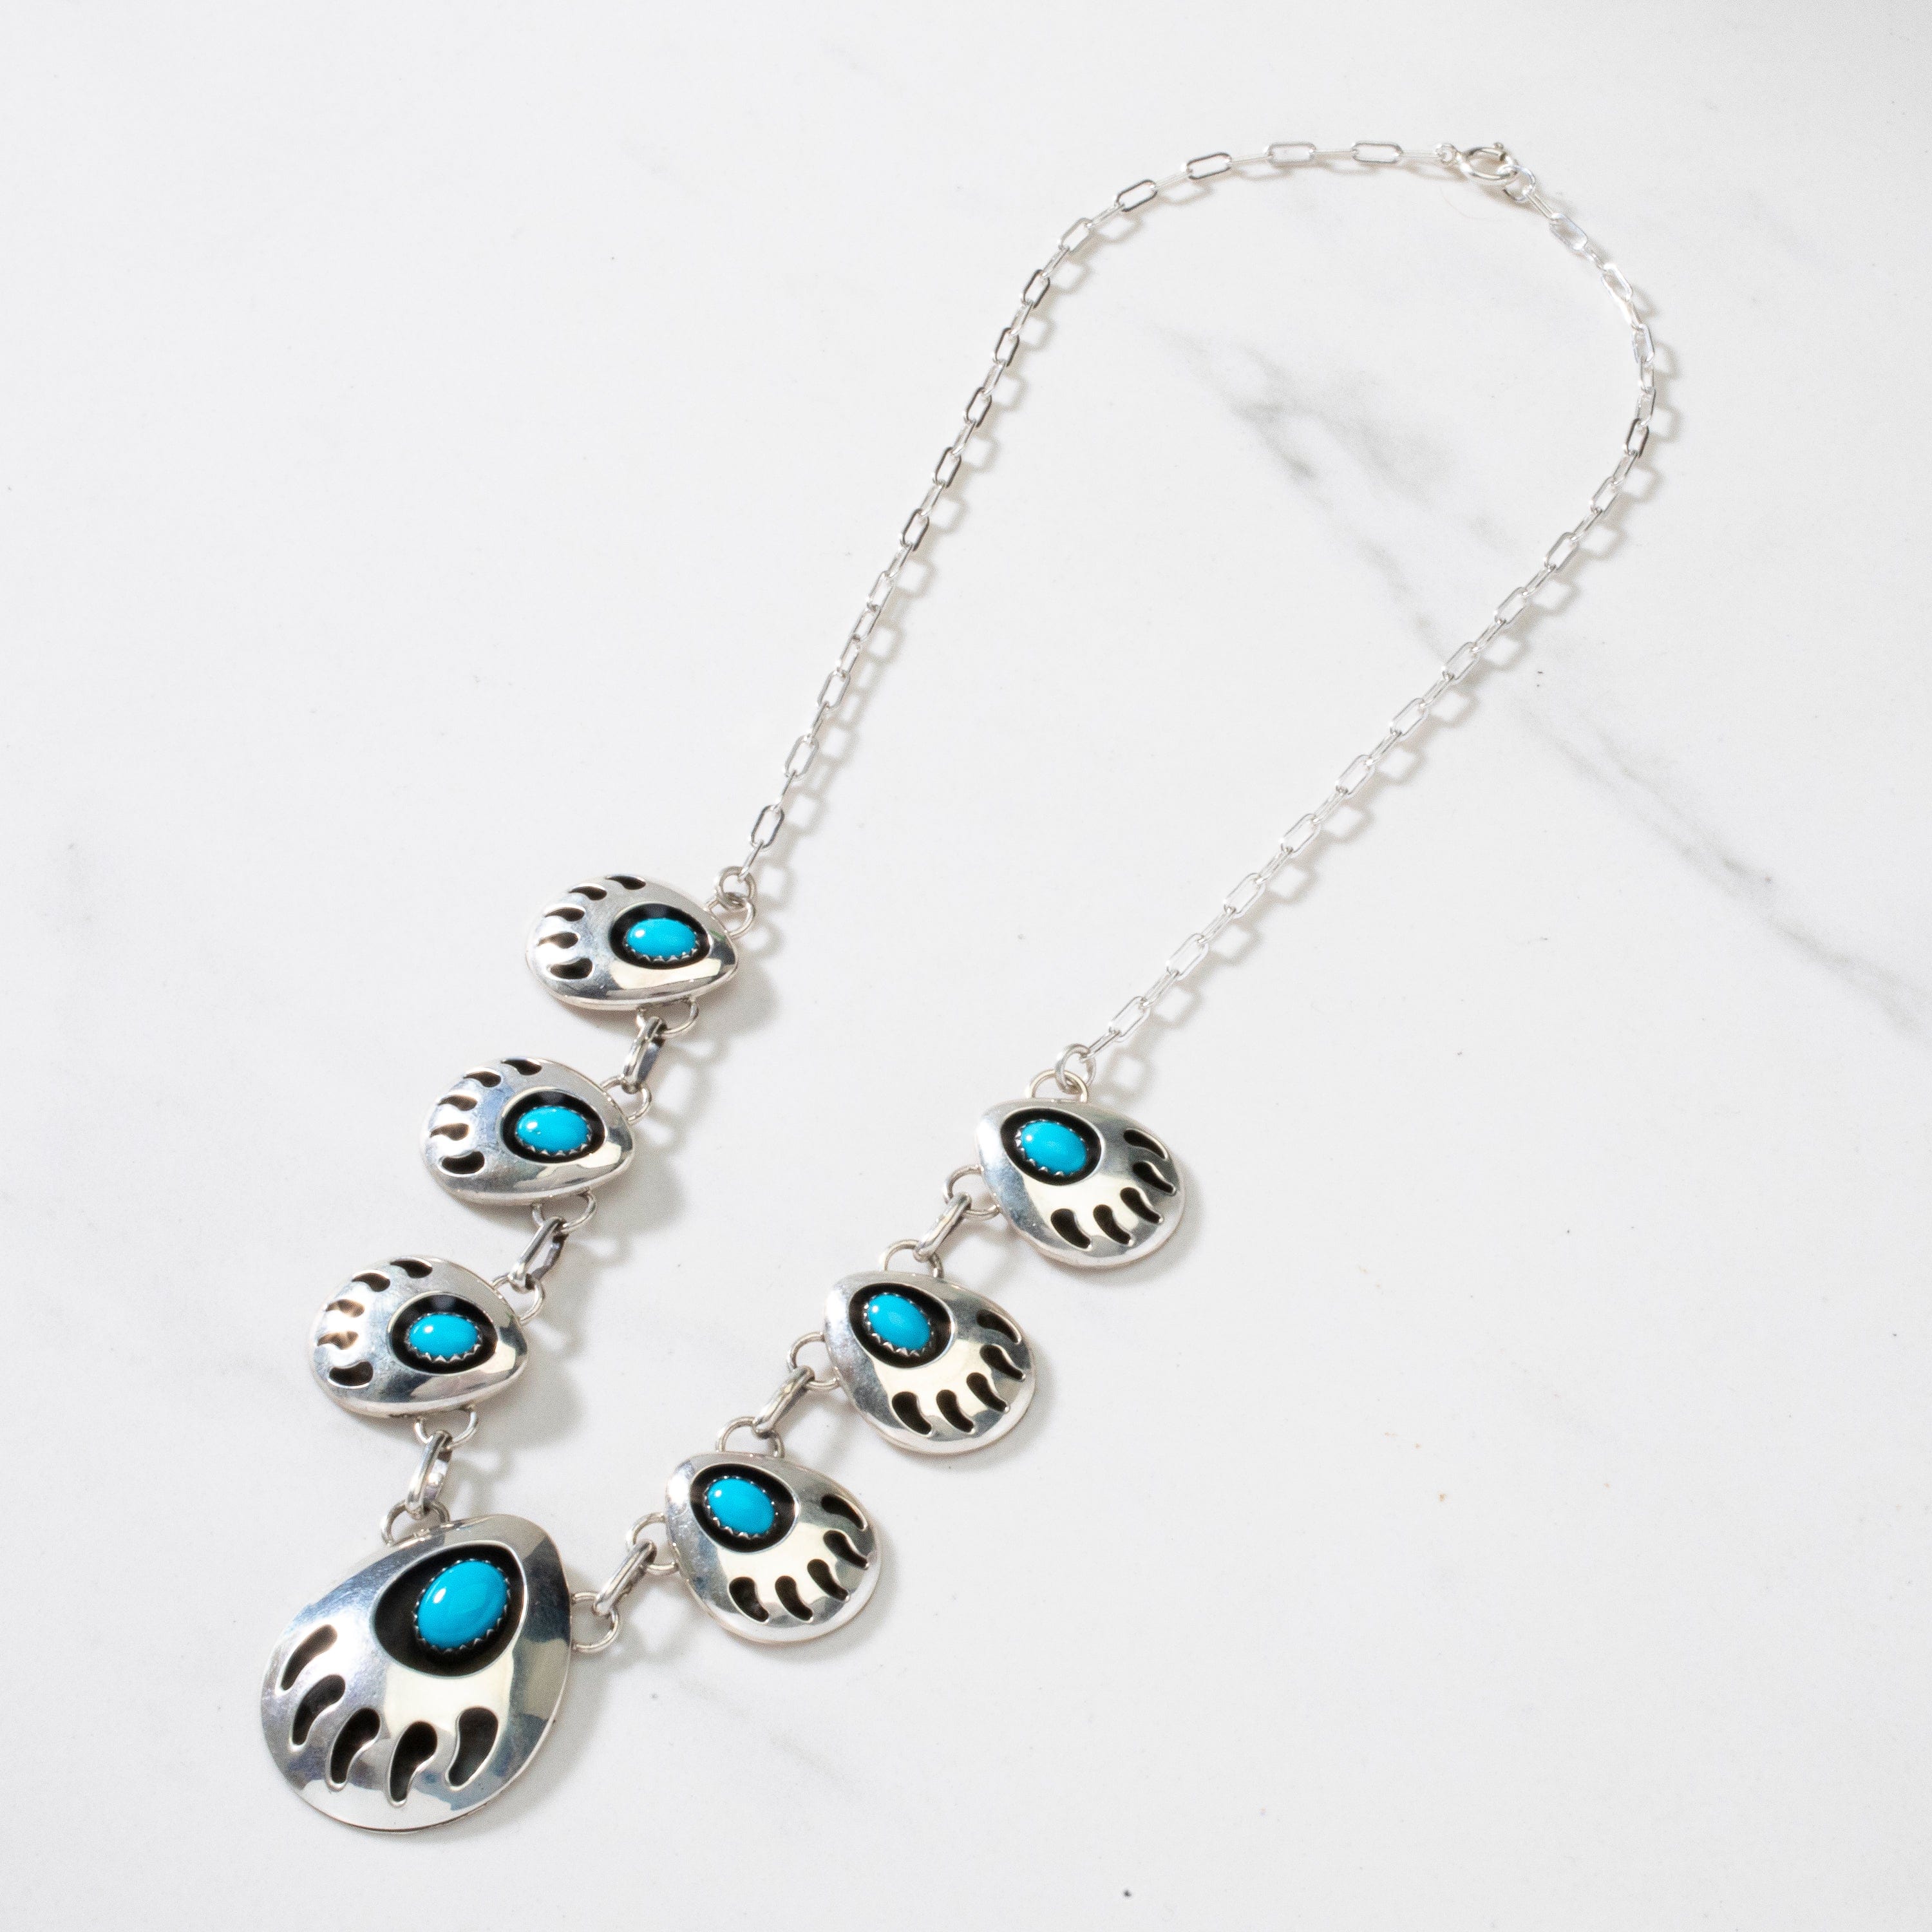 Kalifano Native American Jewelry 18" Kathleen Chavez Sleeping Beauty Turquoise Bear Claw Navajo USA Native American Made 925 Sterling Silver Necklace NAN900.019